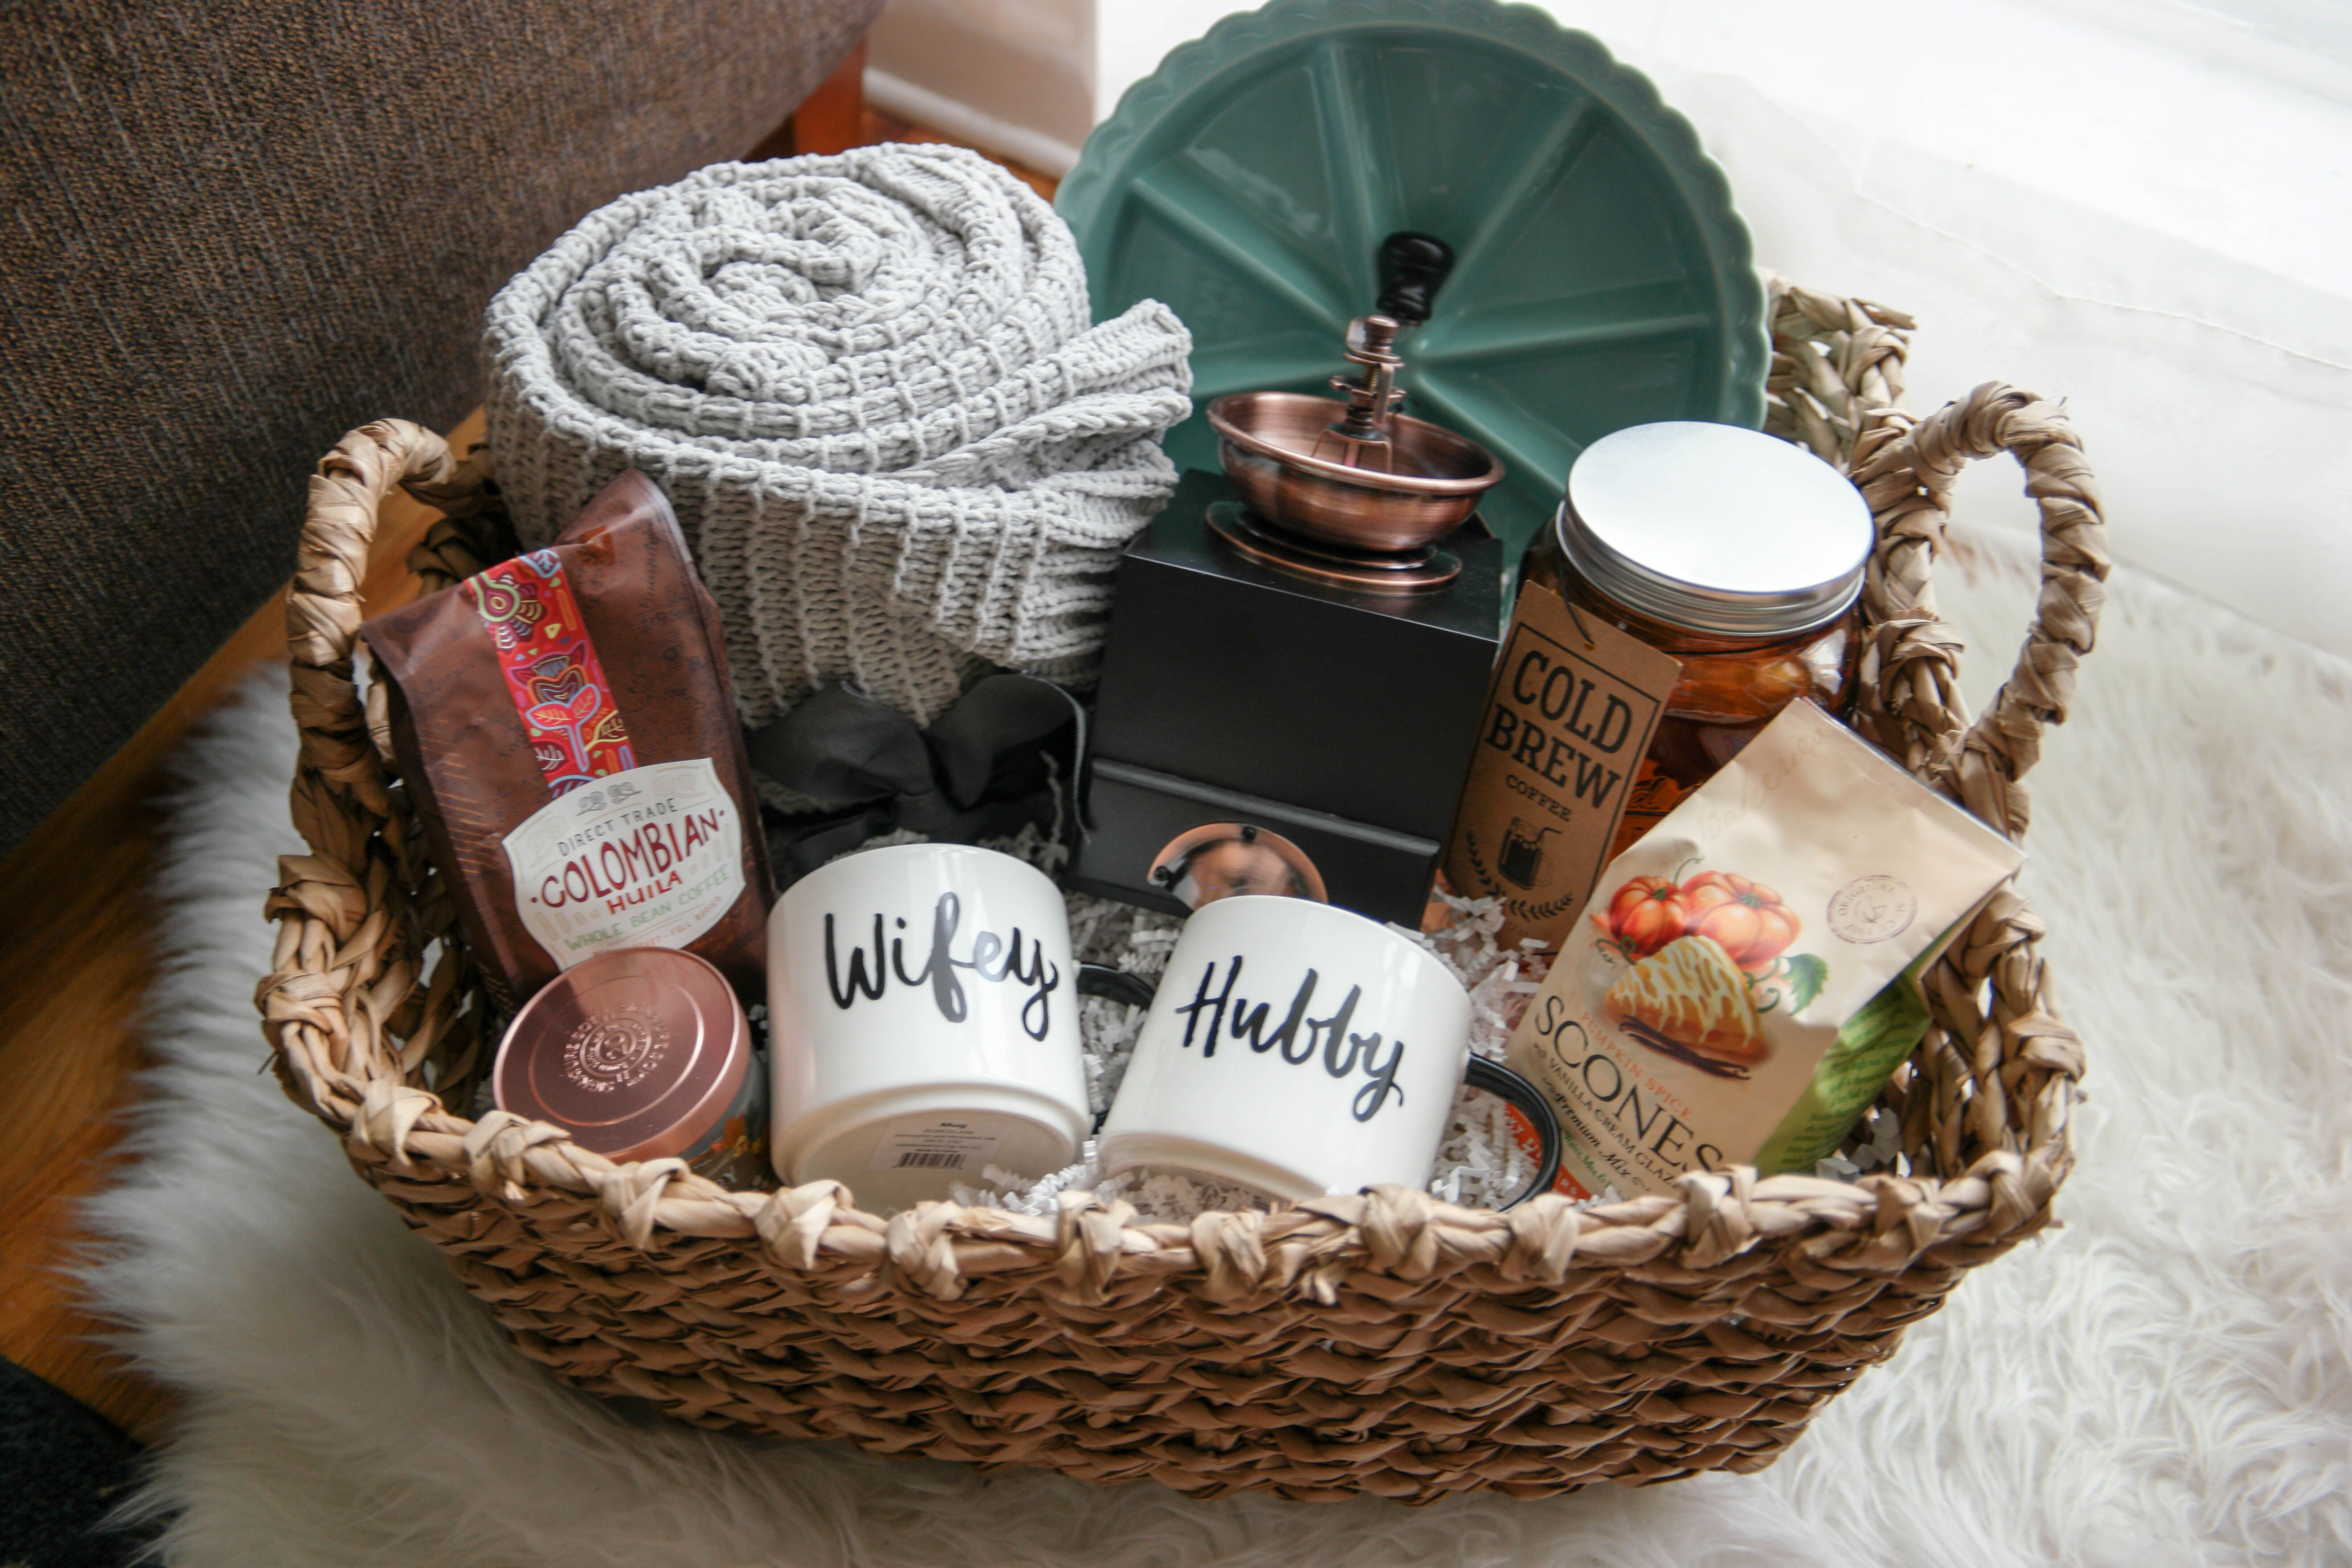 Couple Gift Basket Ideas
 A Cozy Morning Gift Basket A Perfect Gift For Newlyweds